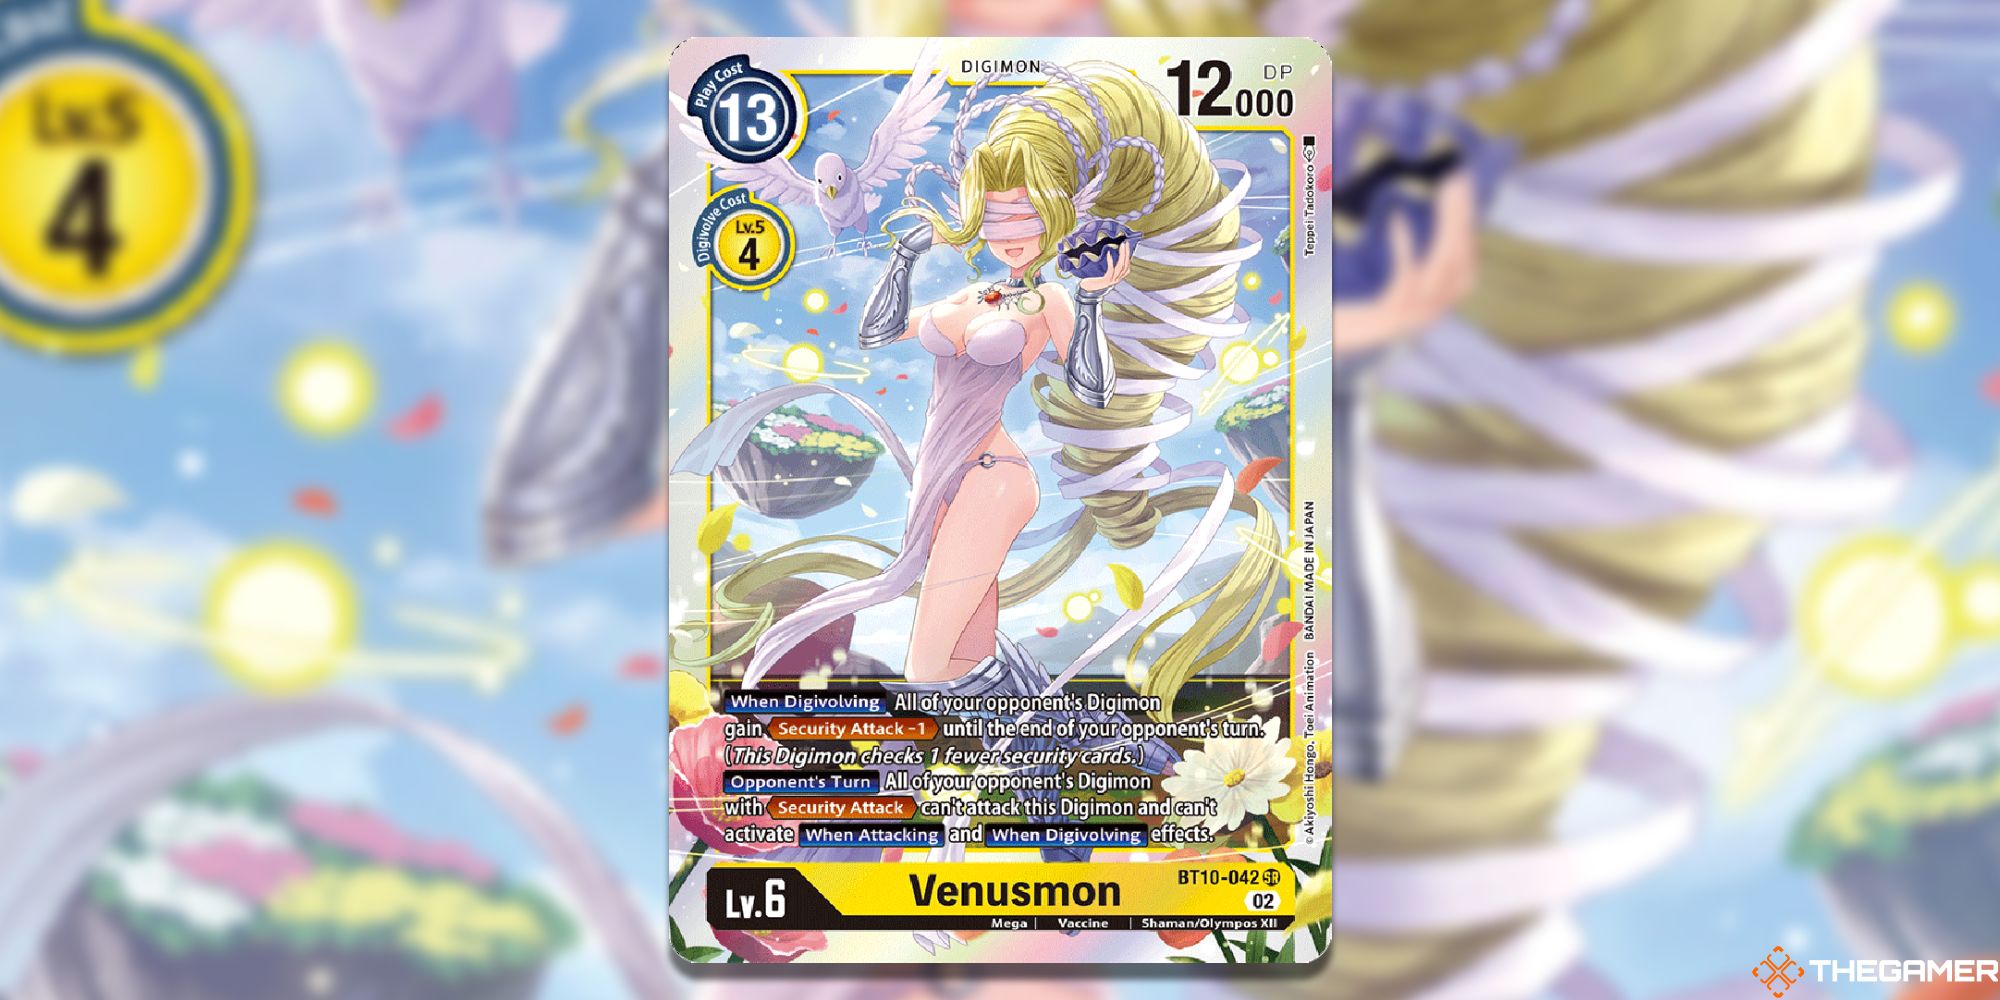 venusmon card from digimon card game with blur background